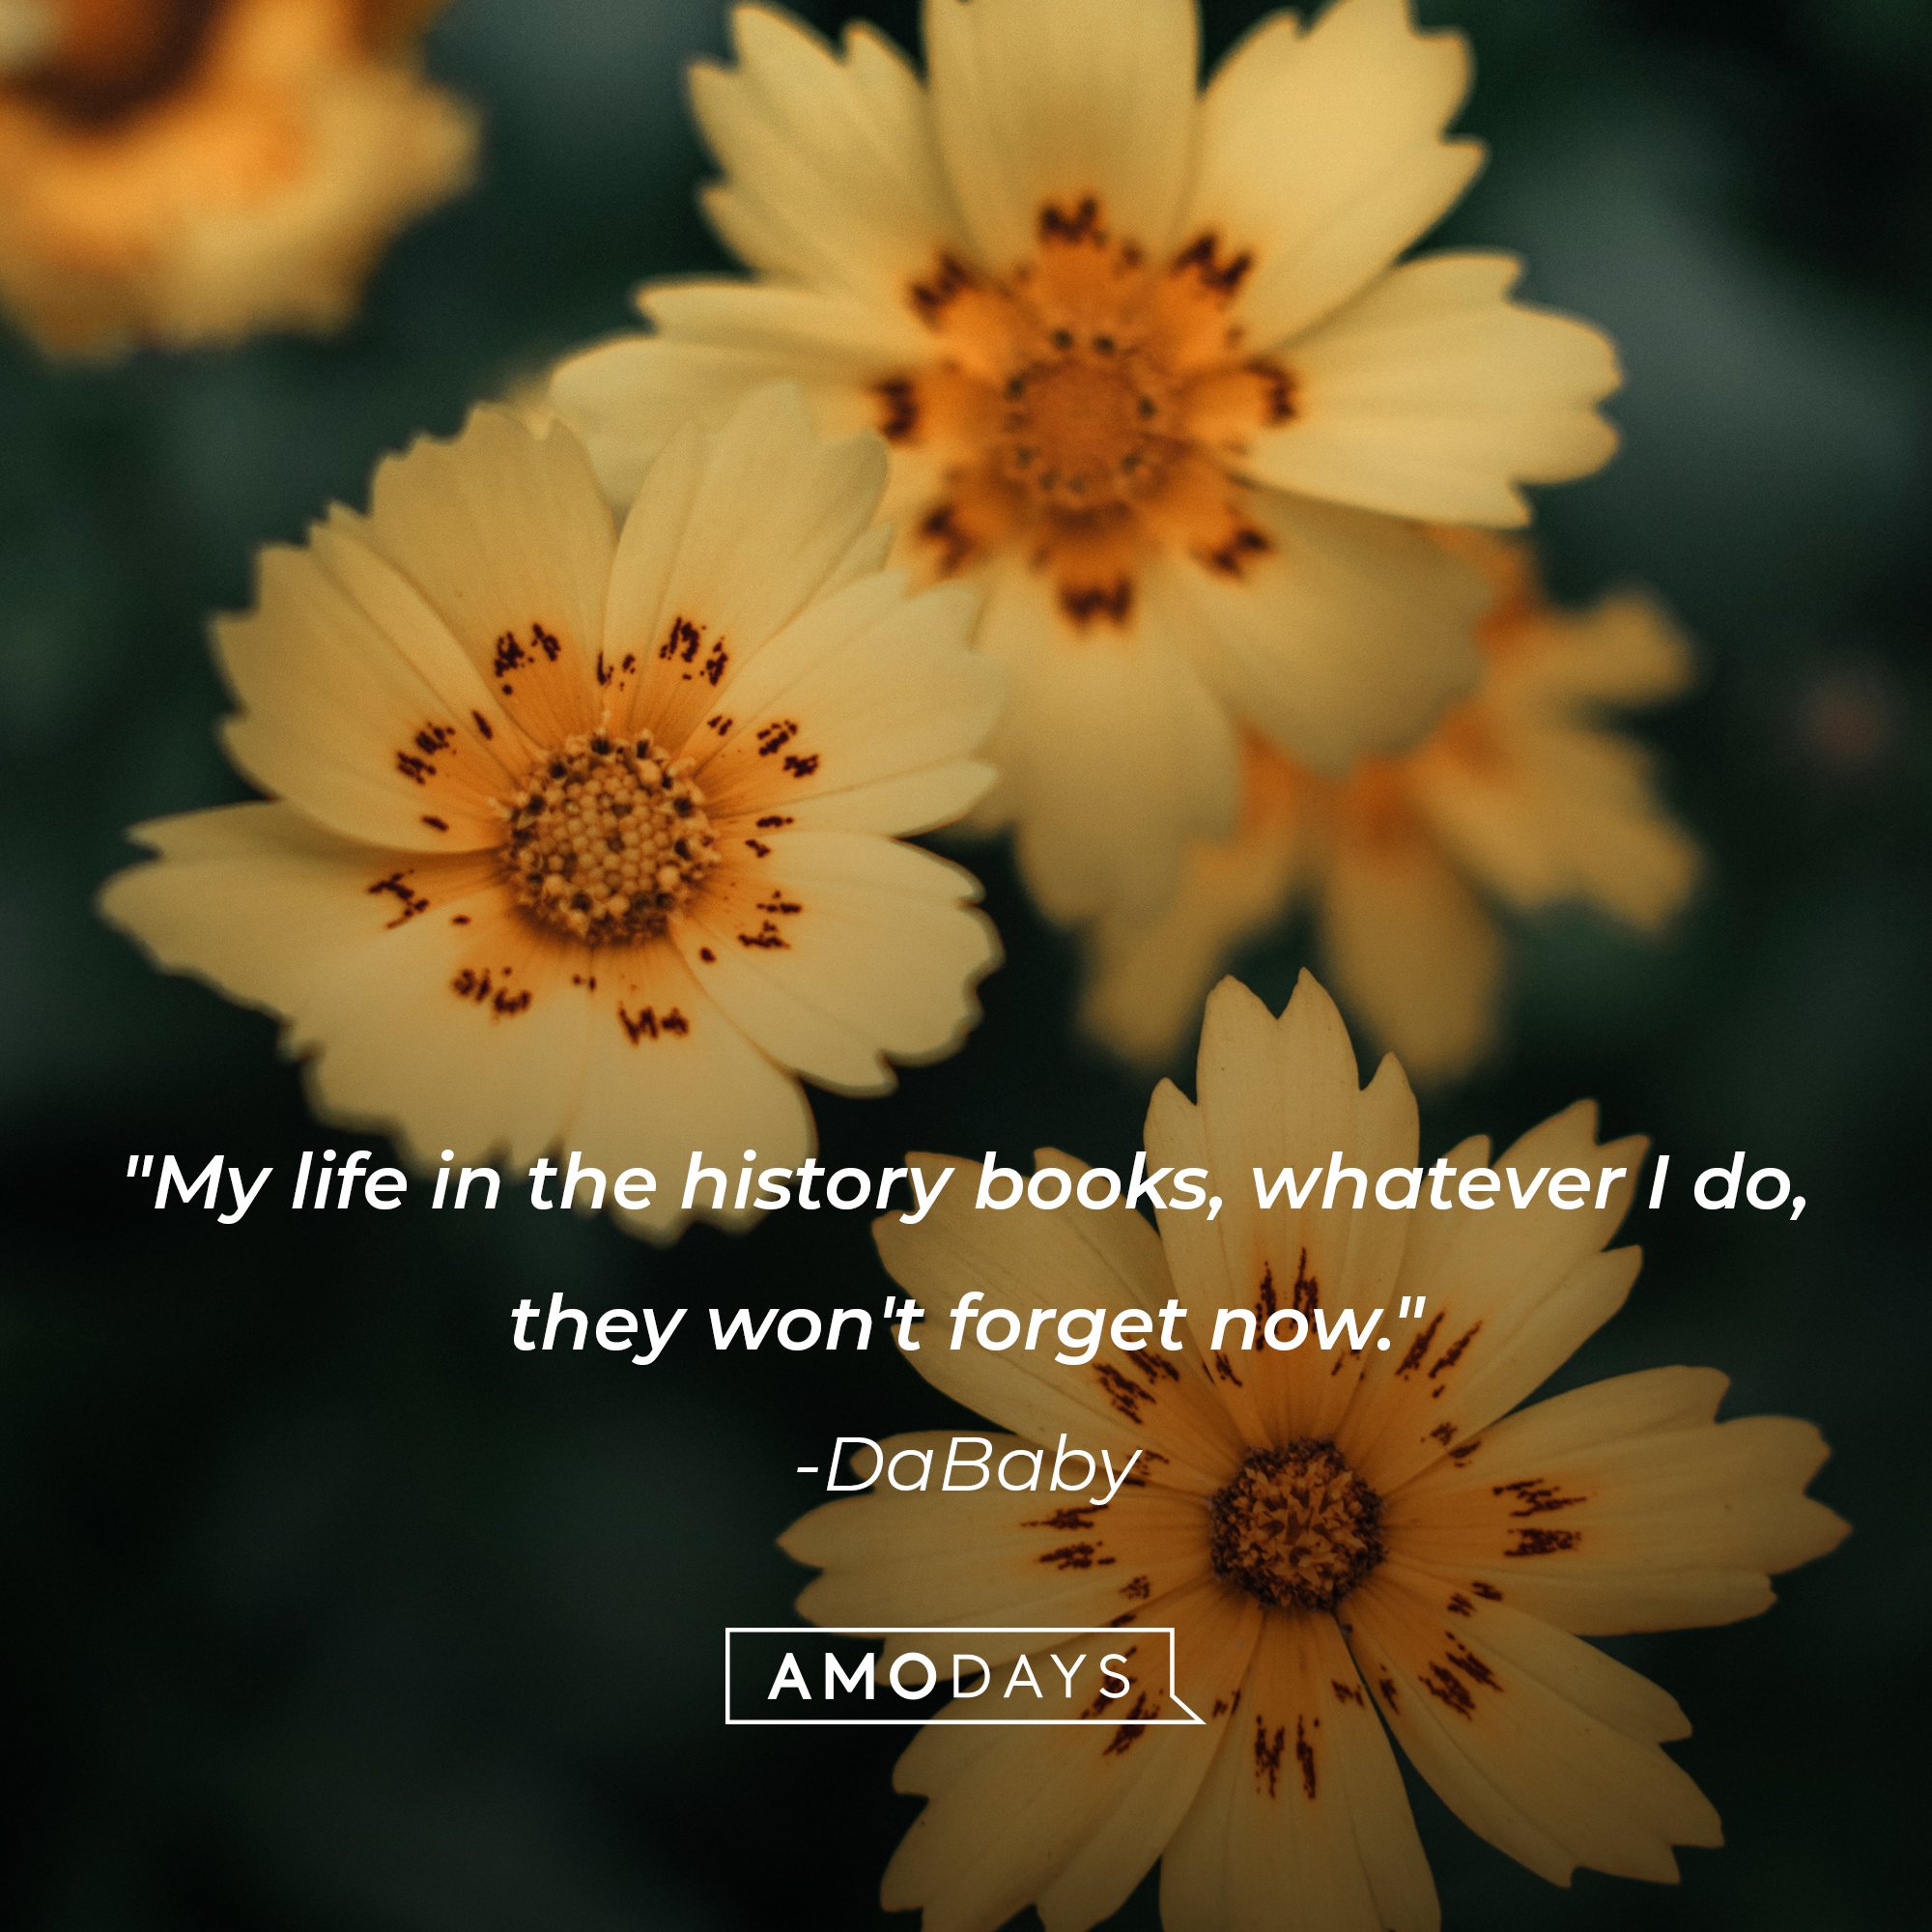 DaBaby‘s quote: "My life in the history books, whatever I do, they won't forget now."  | Image: AmoDays